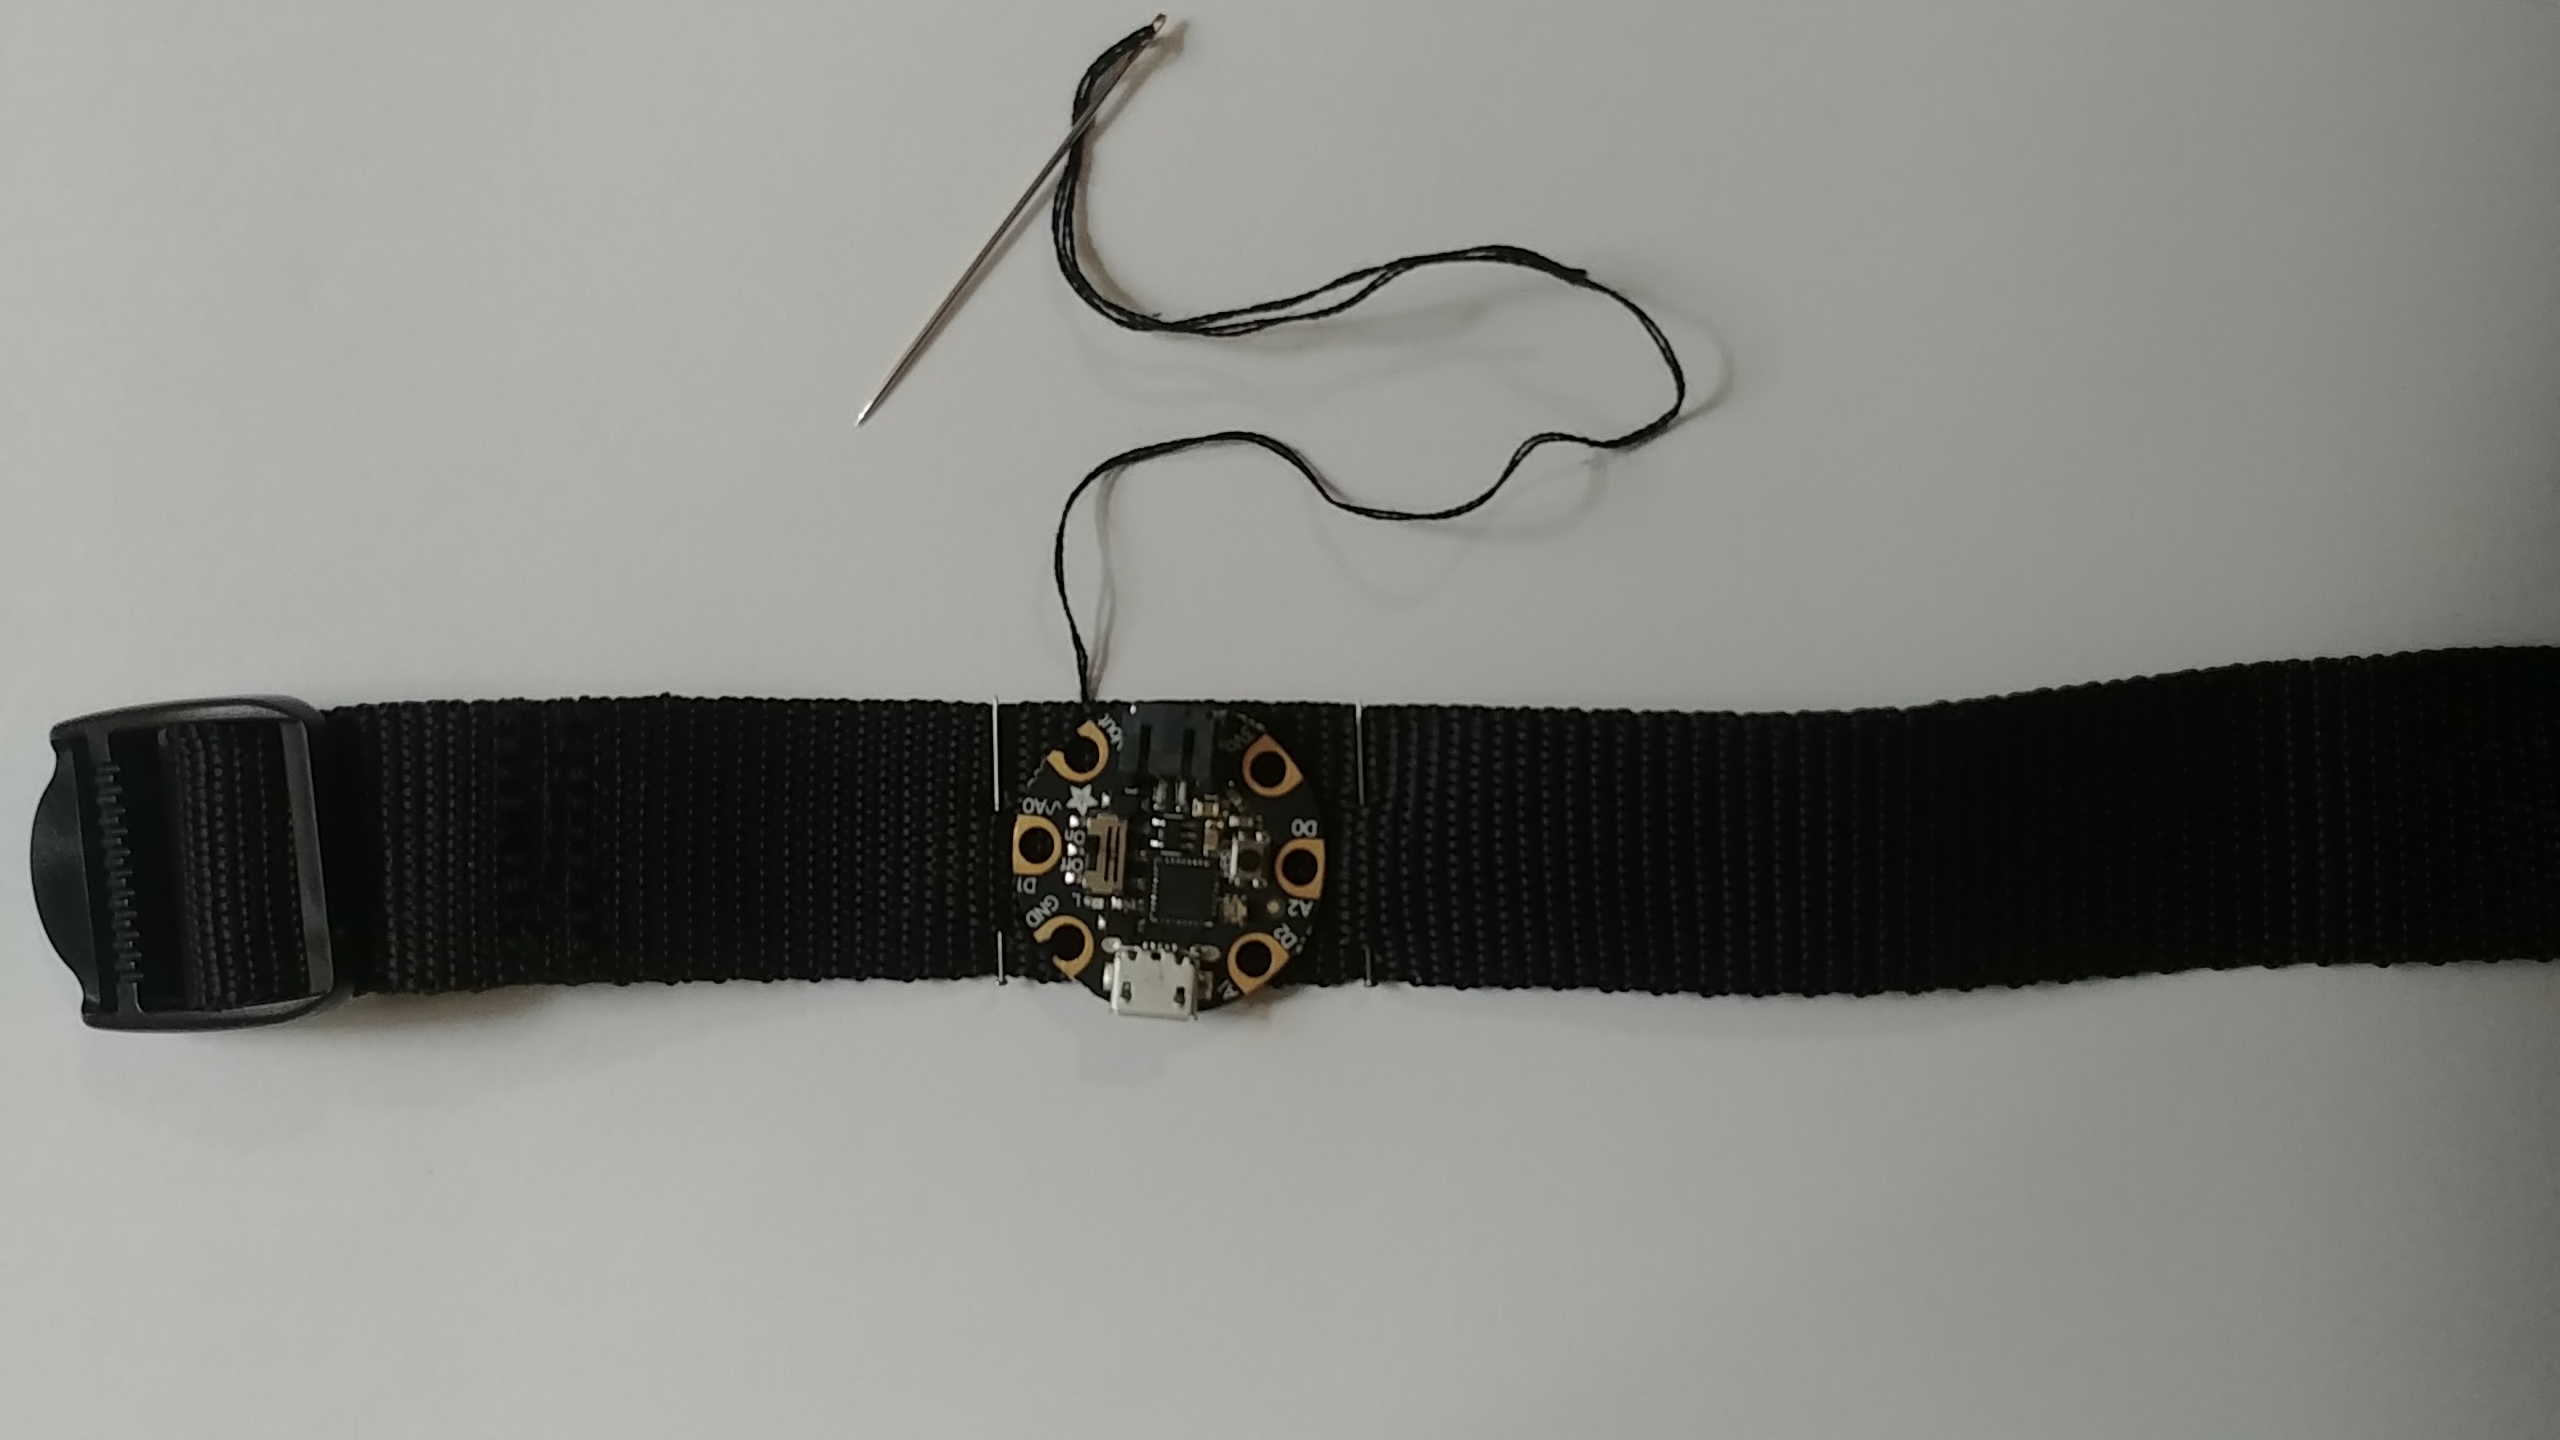 black nylon strap with the gemma on it, there is black thread coming from the bracelet, attached to a sewing needle. There are two sewing pins on either side of the gemma